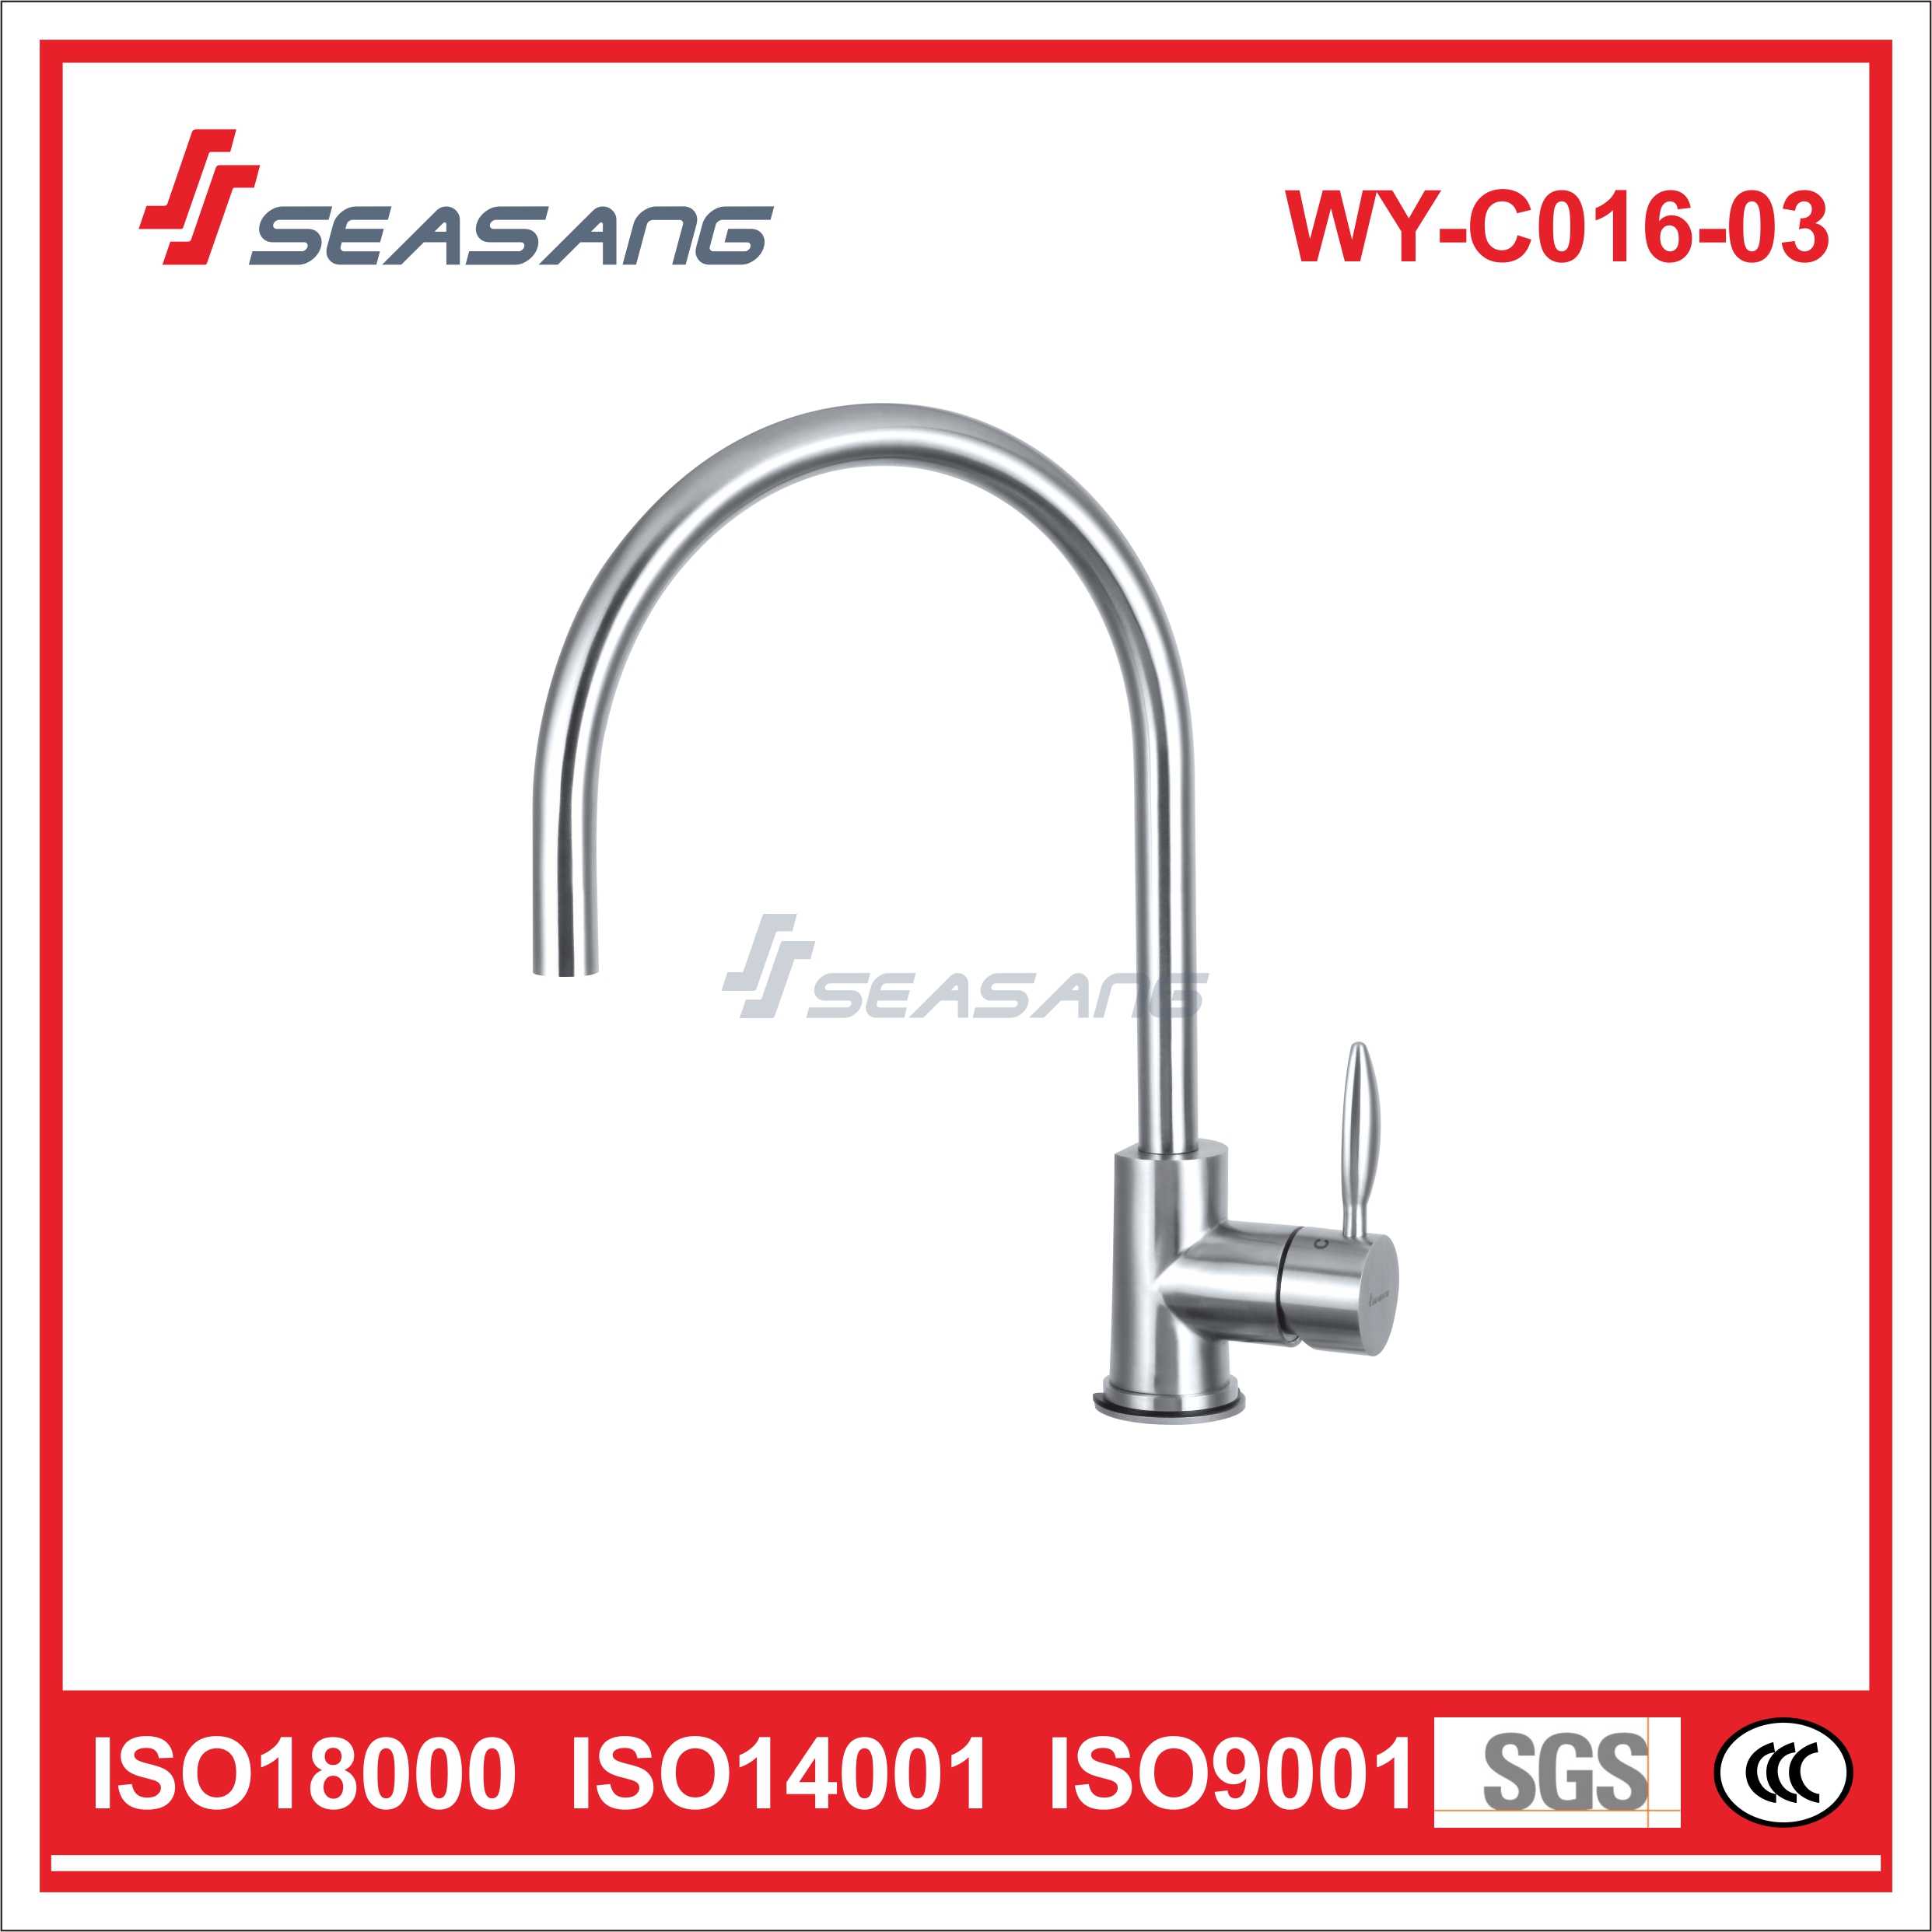 Stainless Steel Kitchen Sink Water Tap with Watermark WY-C016-03